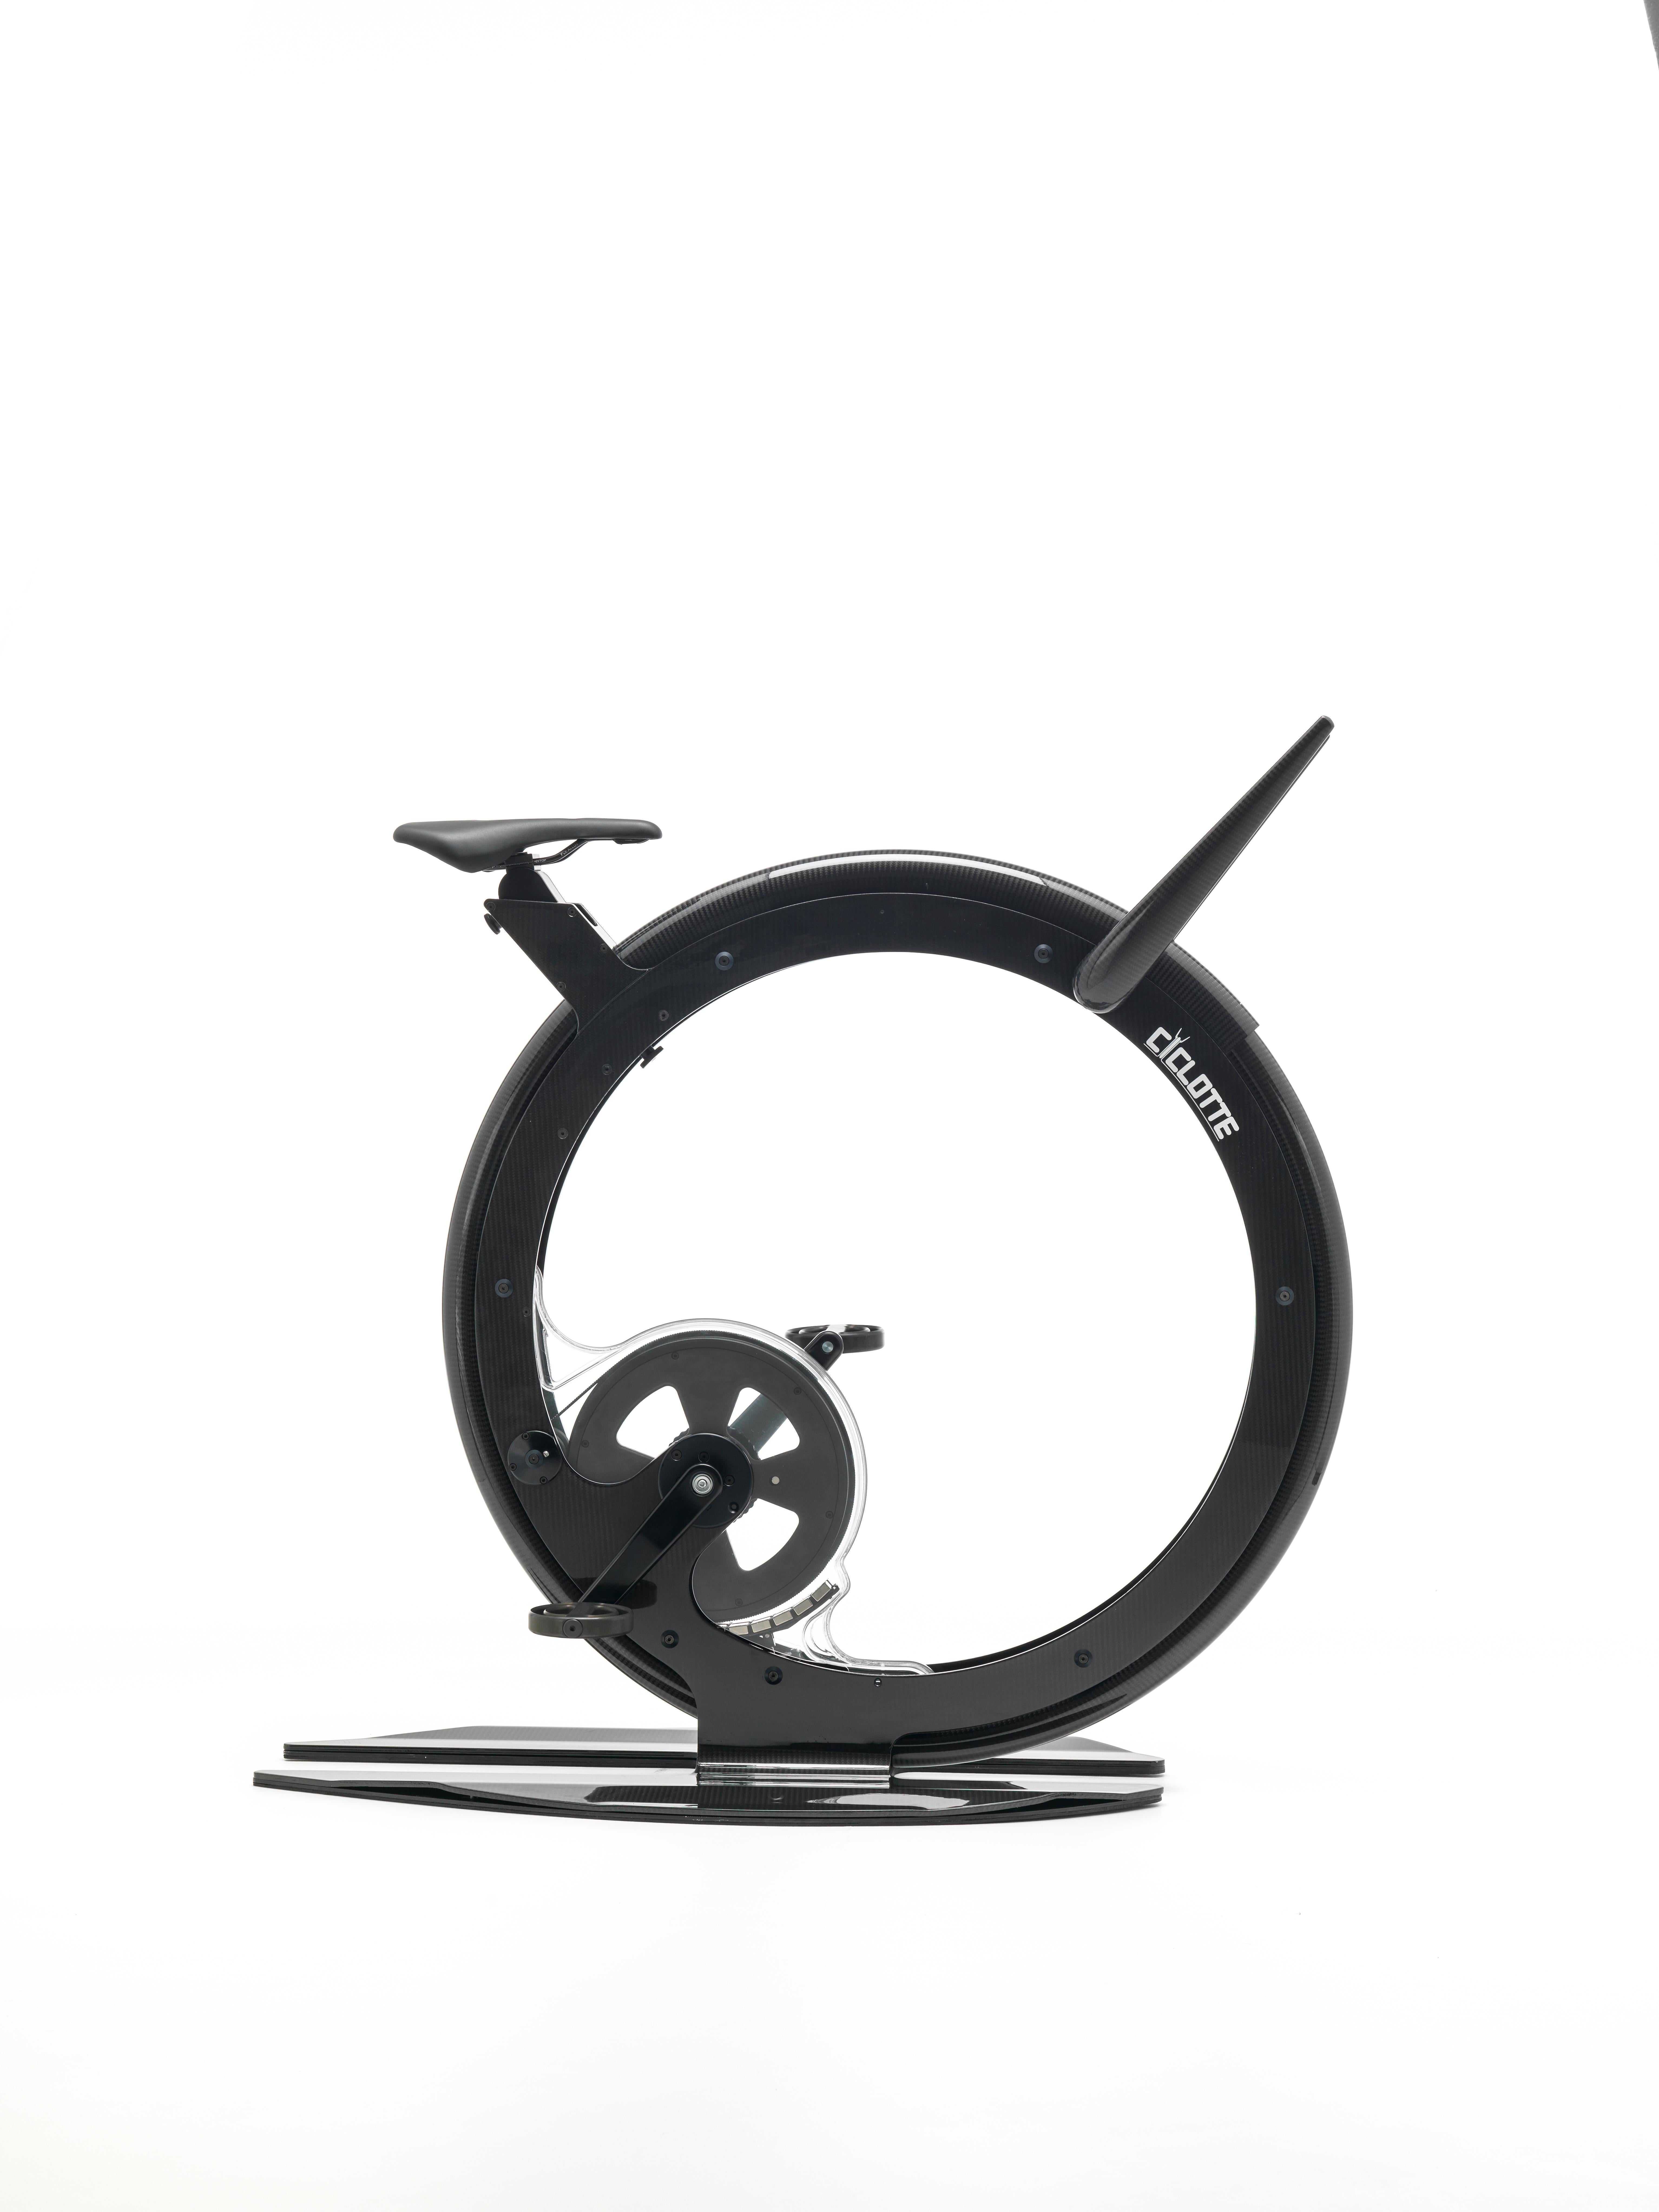 Ciclotte bike is an innovative exercise bike, designed and made in Italy, that combines idea, form and technology rethinking the traditional aesthetic and functional values of an exercise bike. Ciclotte bike has been manufactured using exceptional